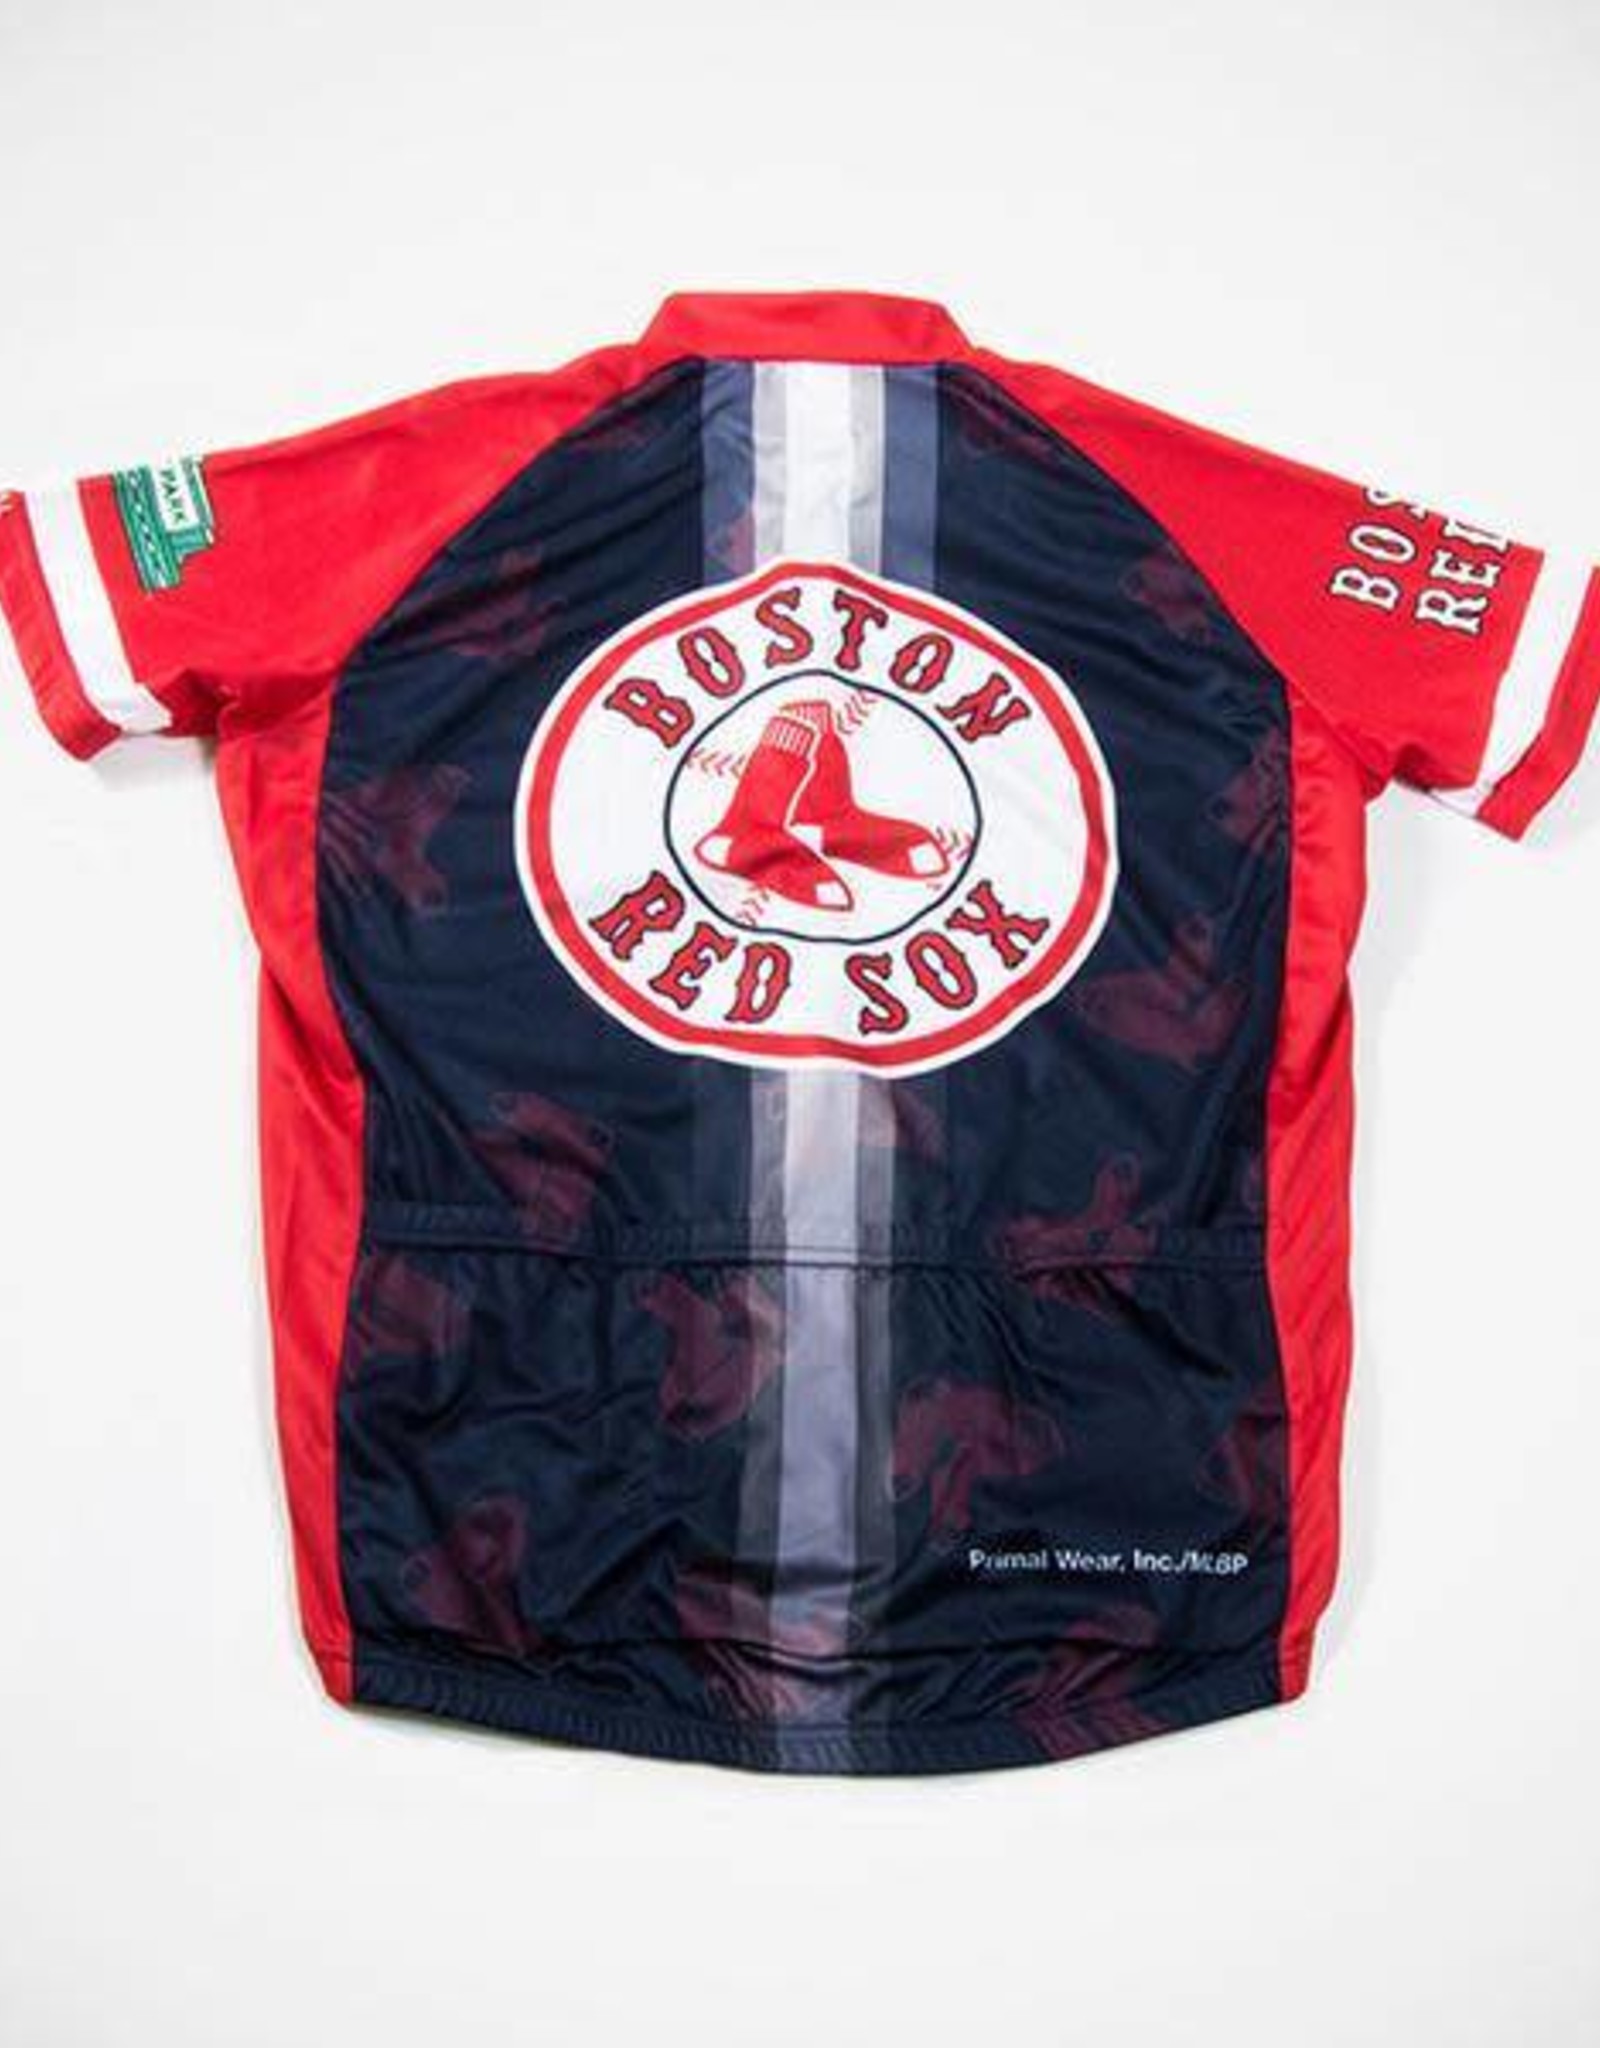 Primal to offer MLB-branded cycling apparel